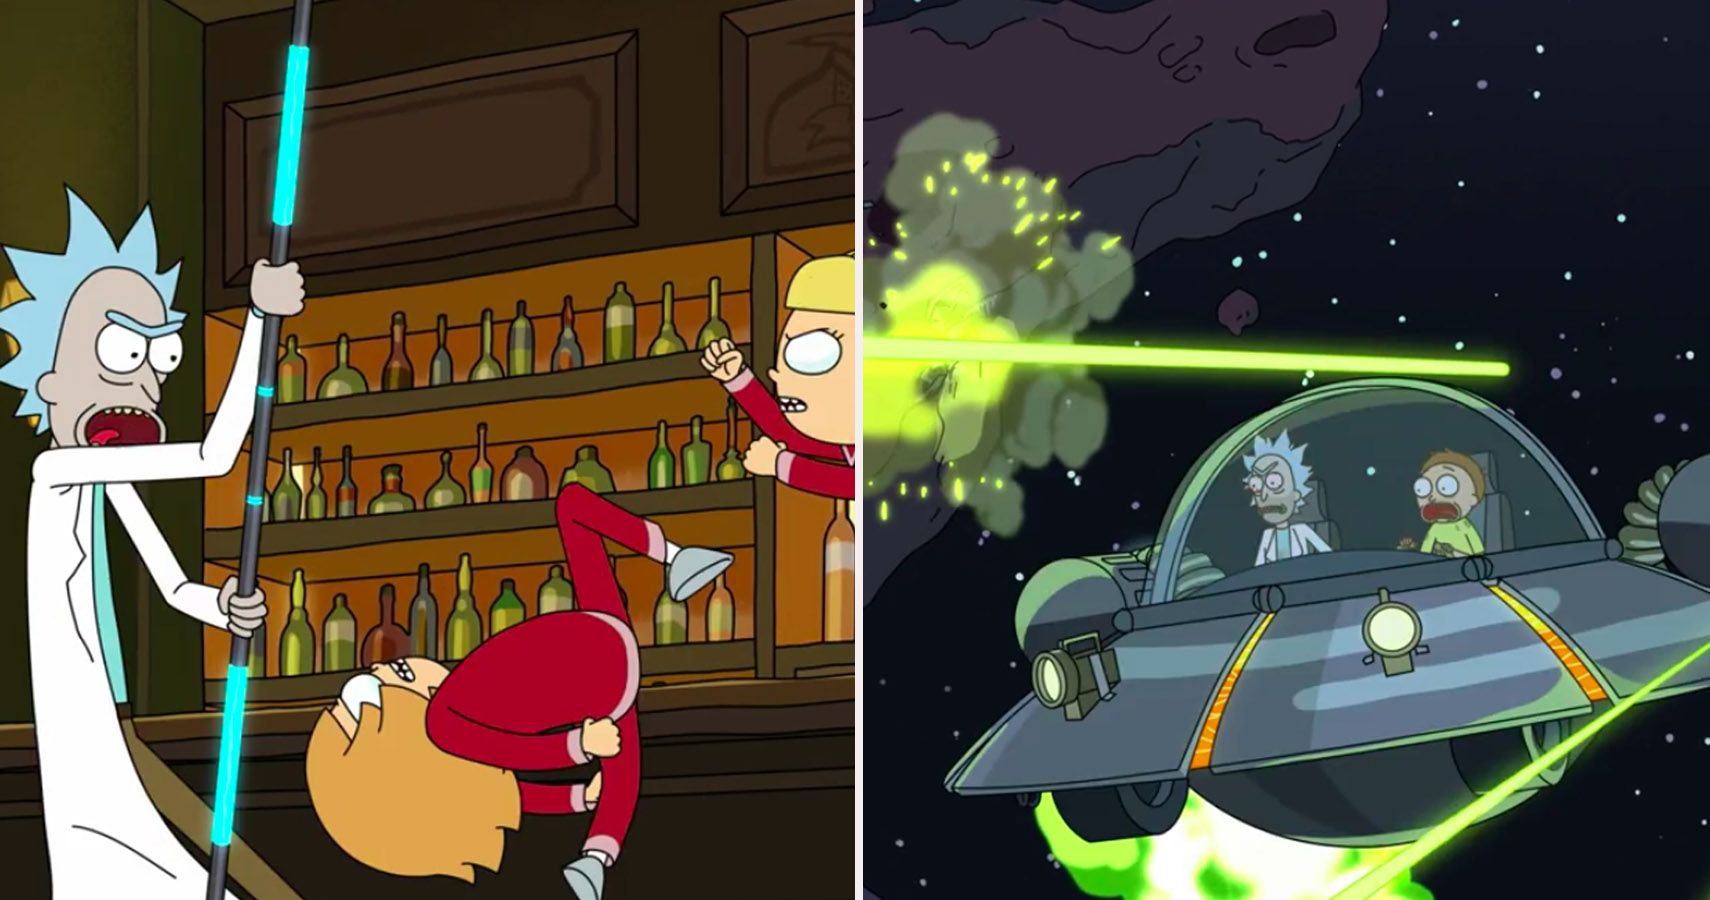 The 15 Best Episodes of 'Rick and Morty